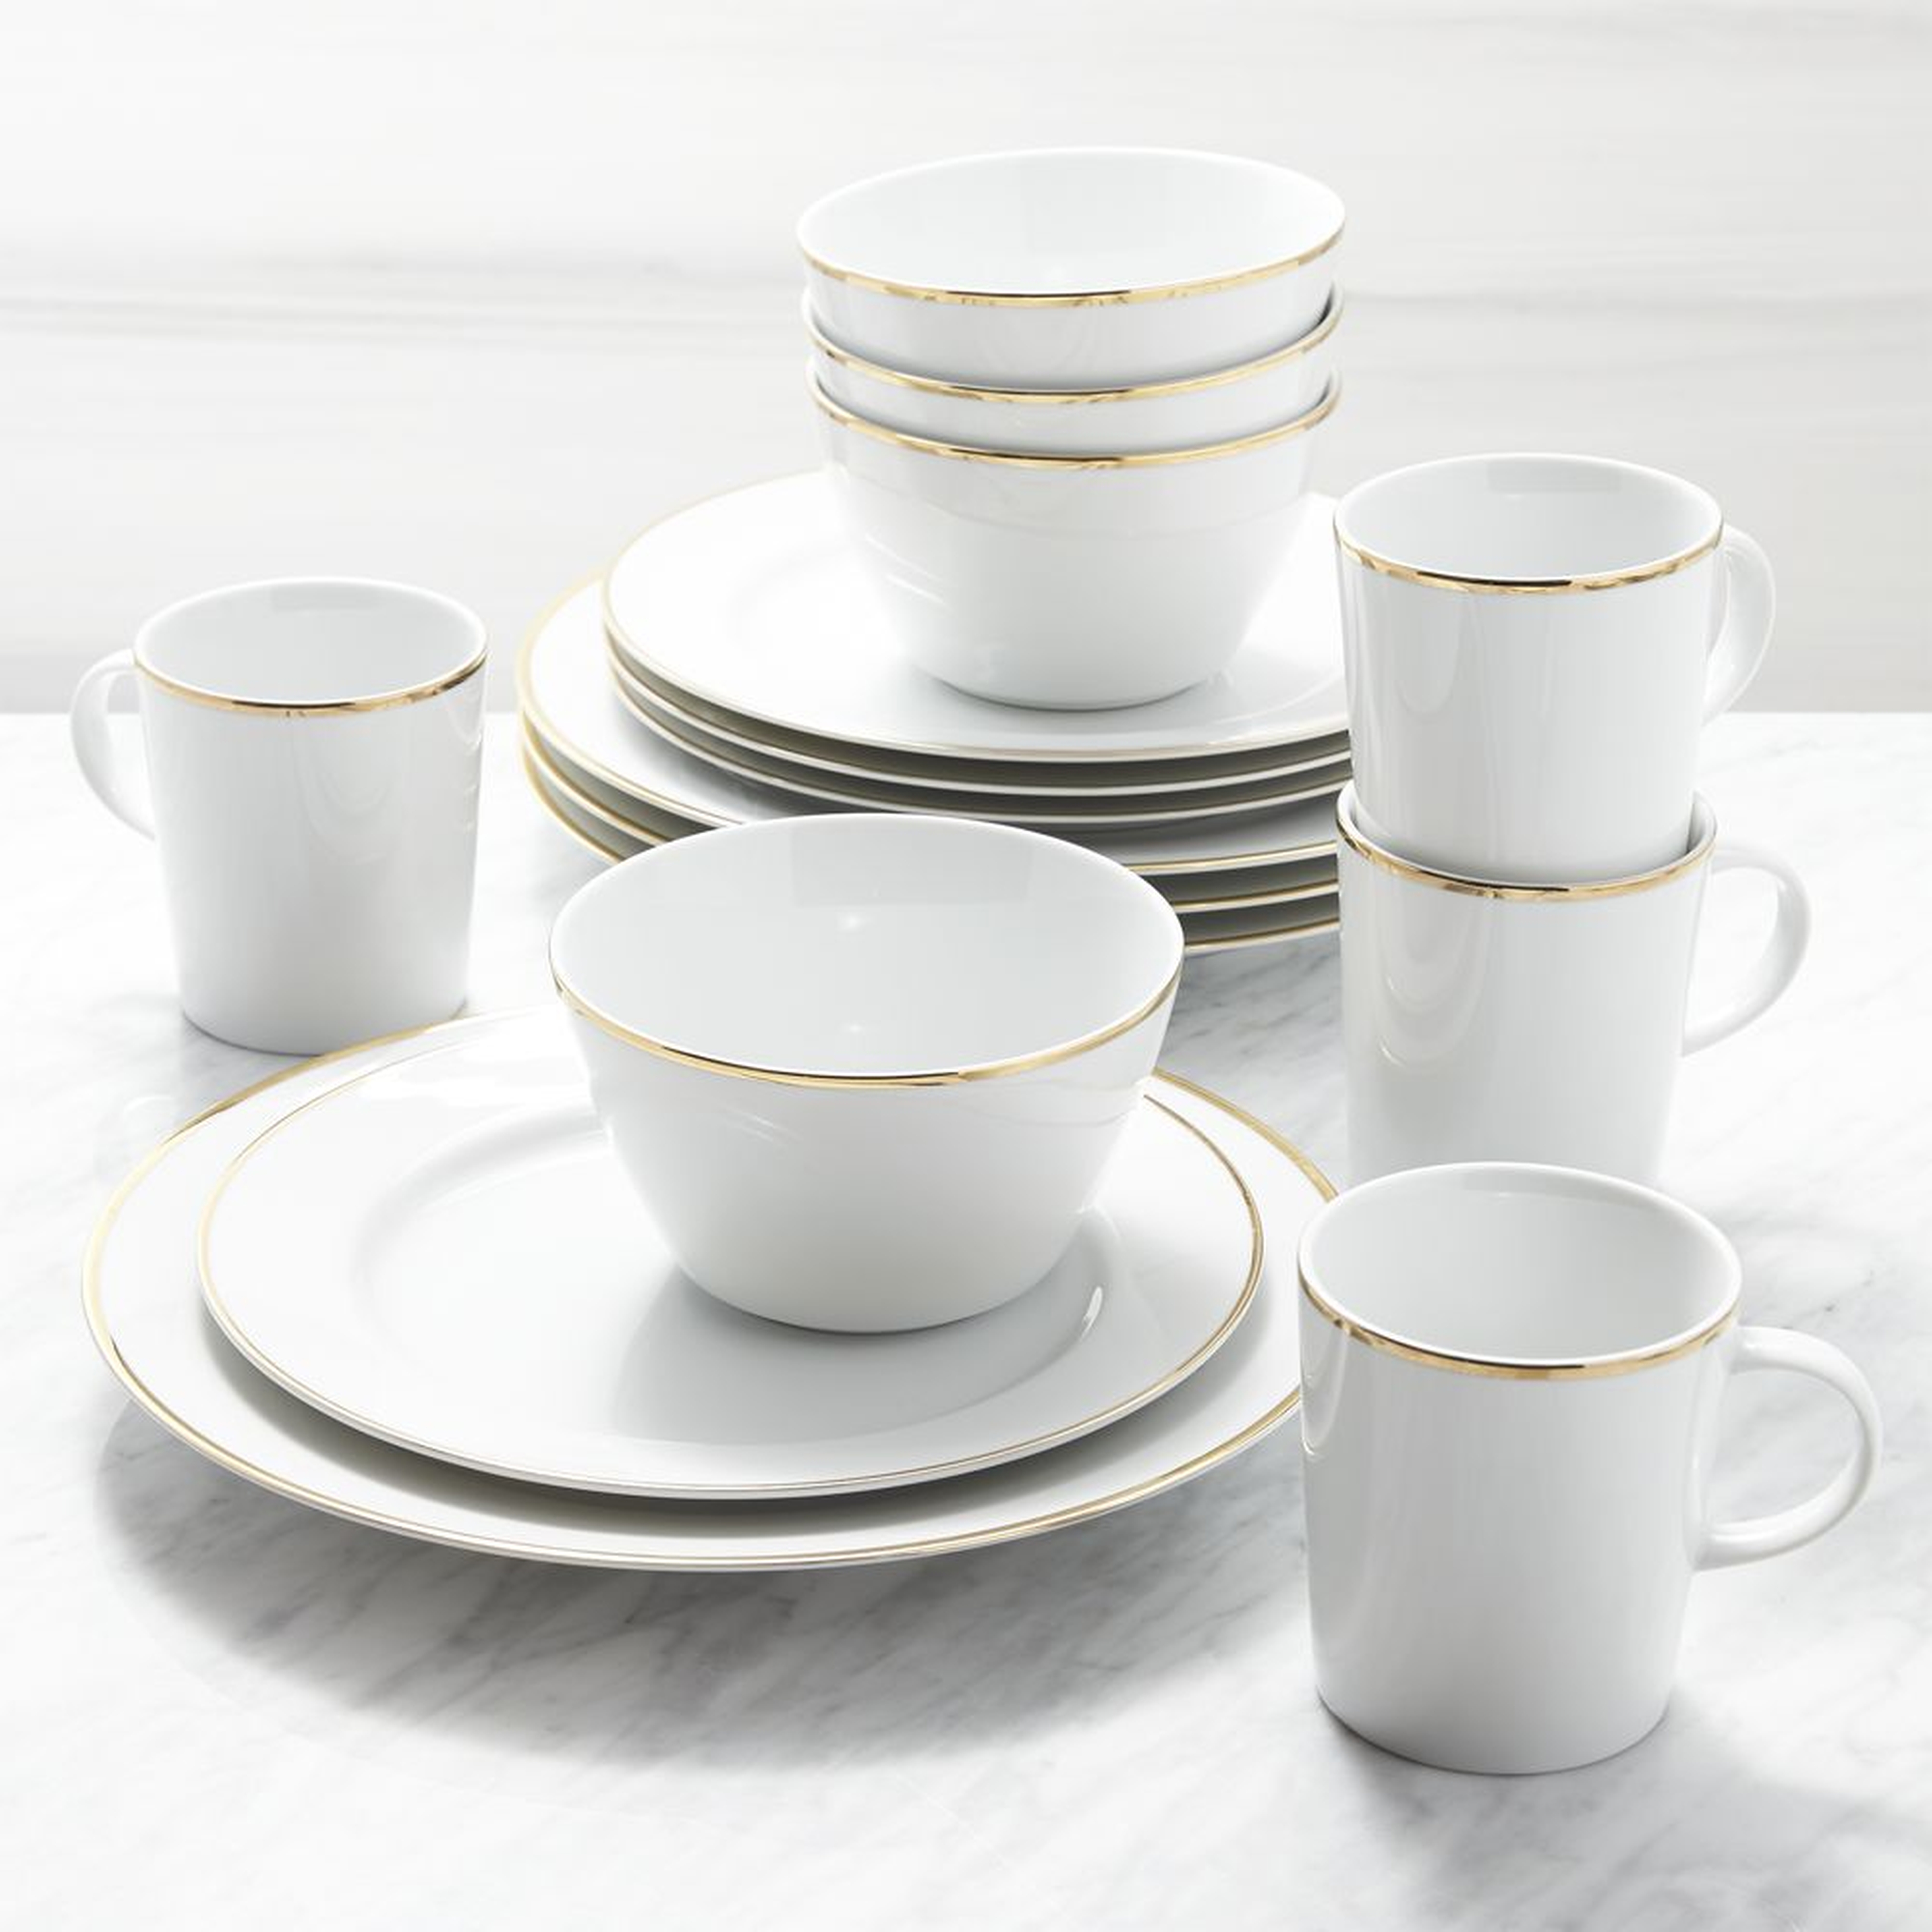 Maison Gold Rim 16-Piece Place Setting - Crate and Barrel